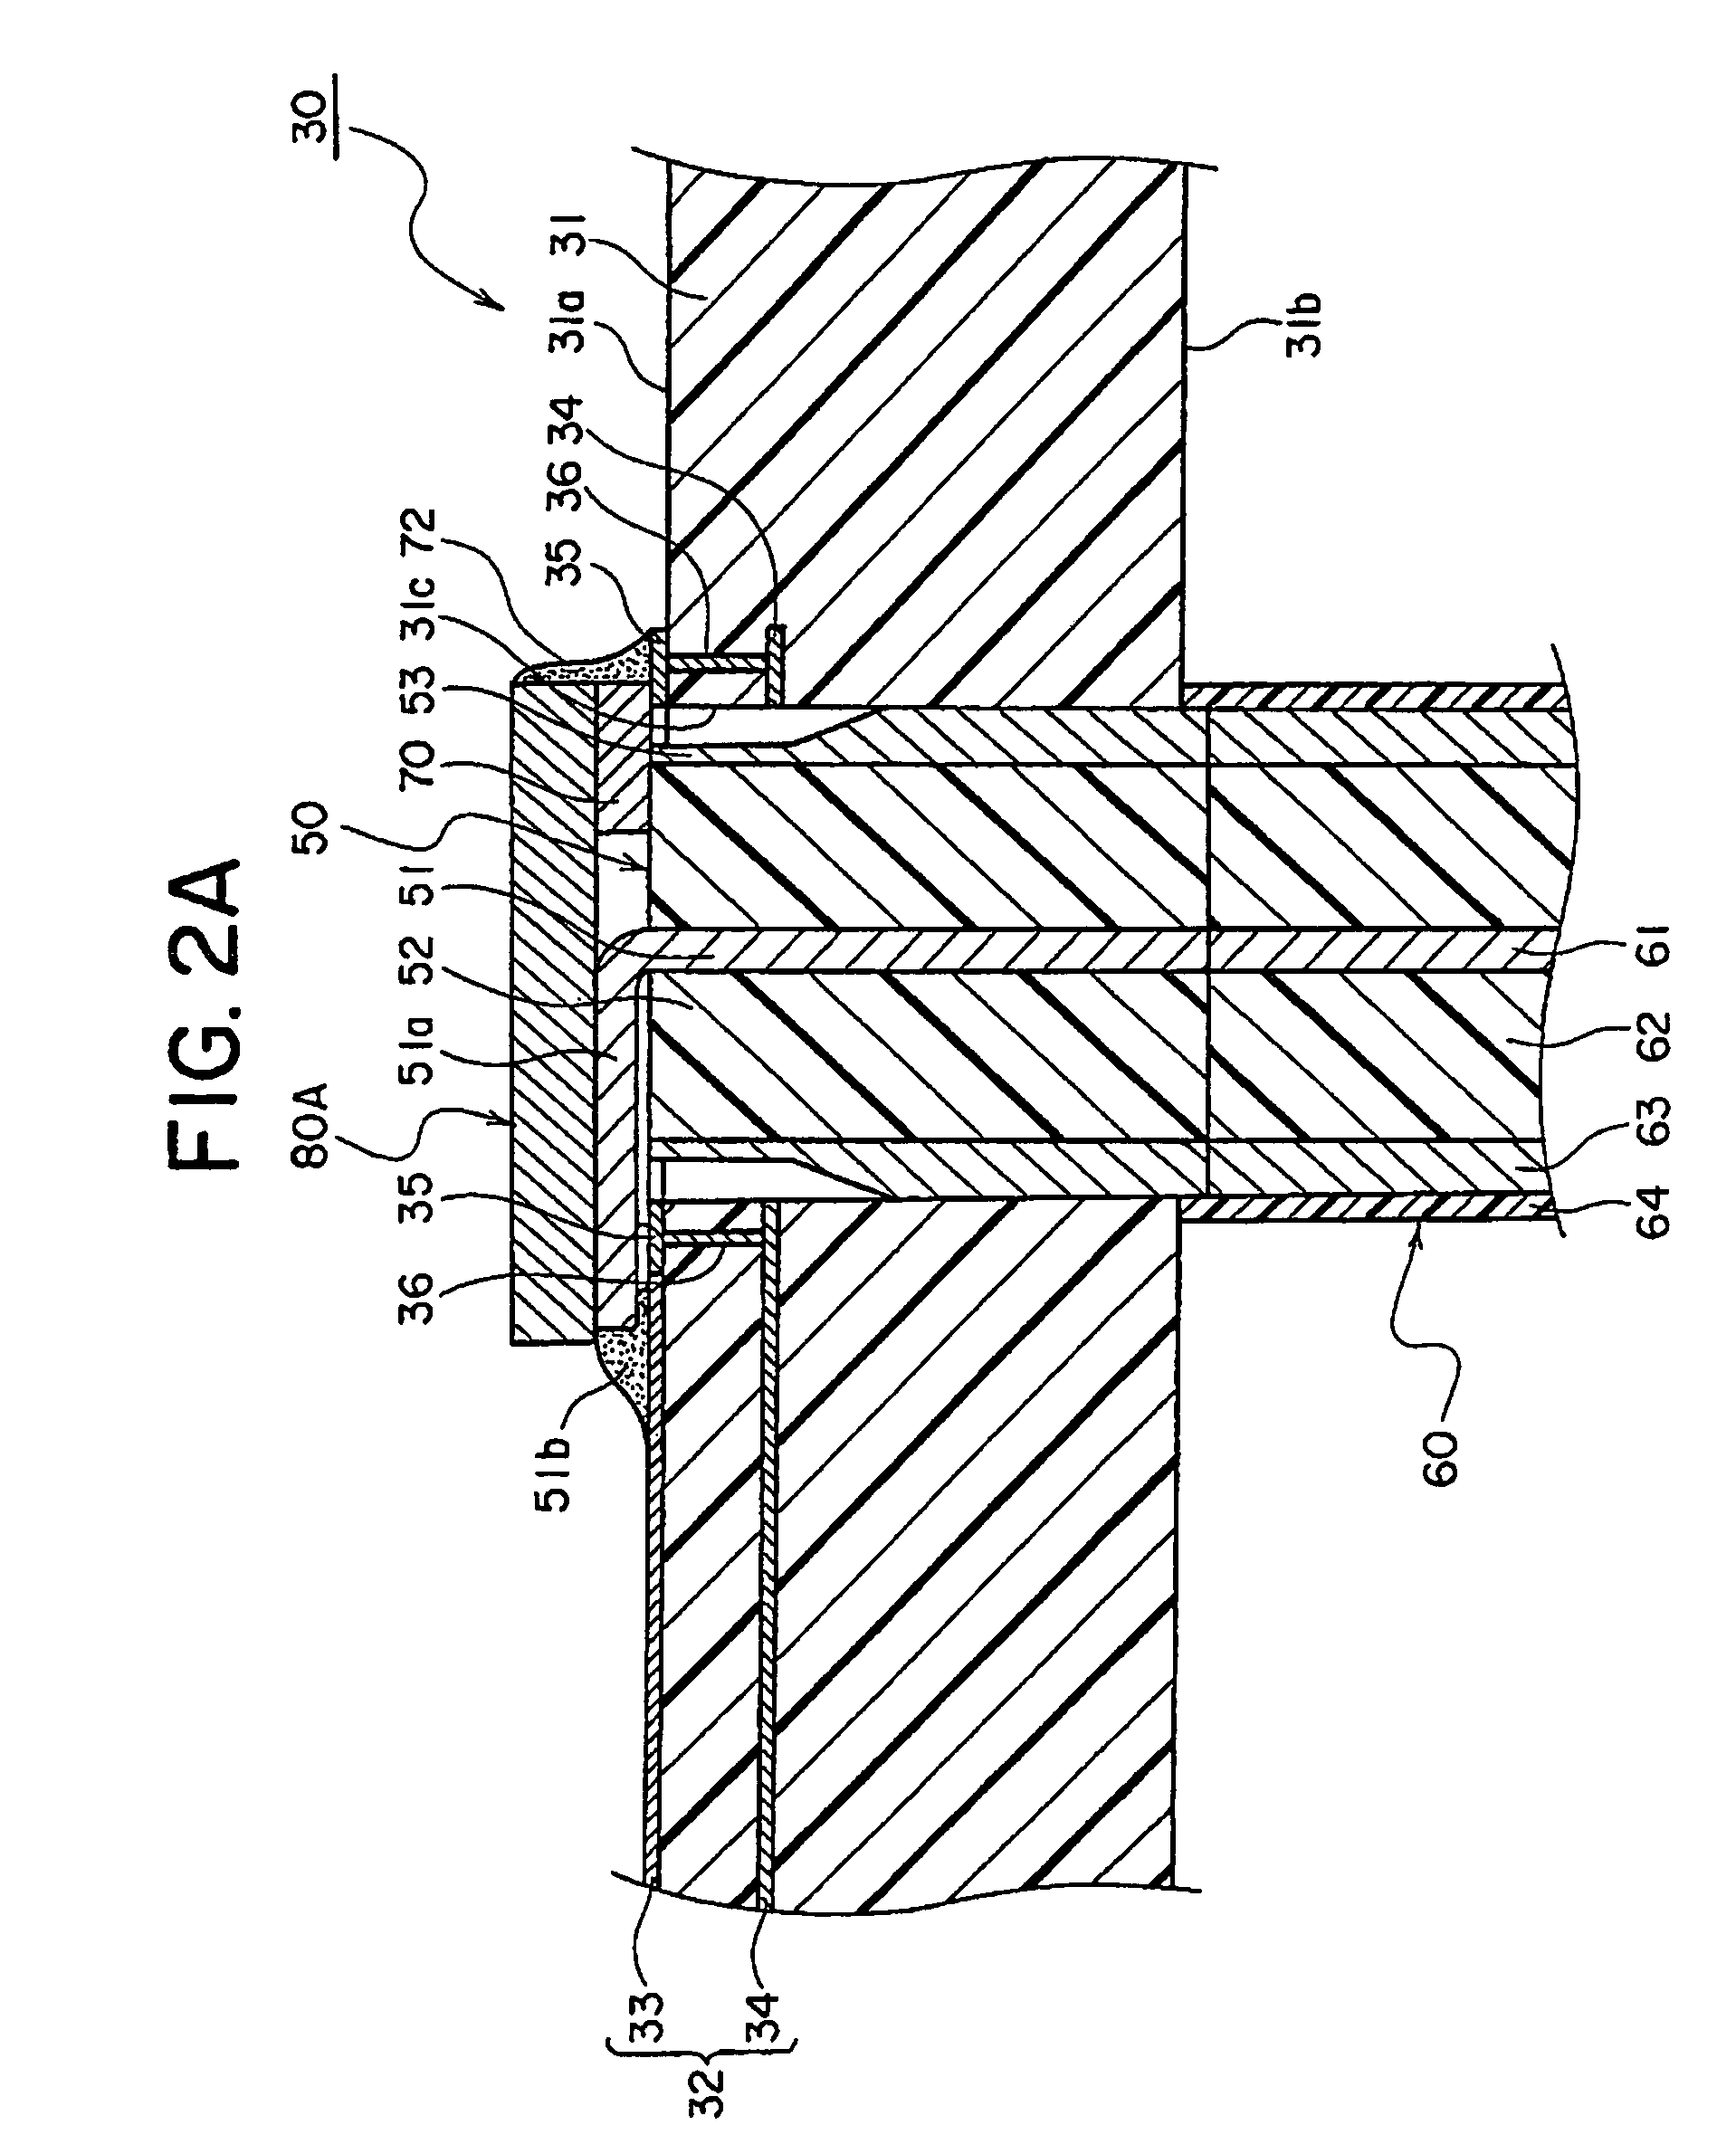 Measurement board for electronic device test apparatus